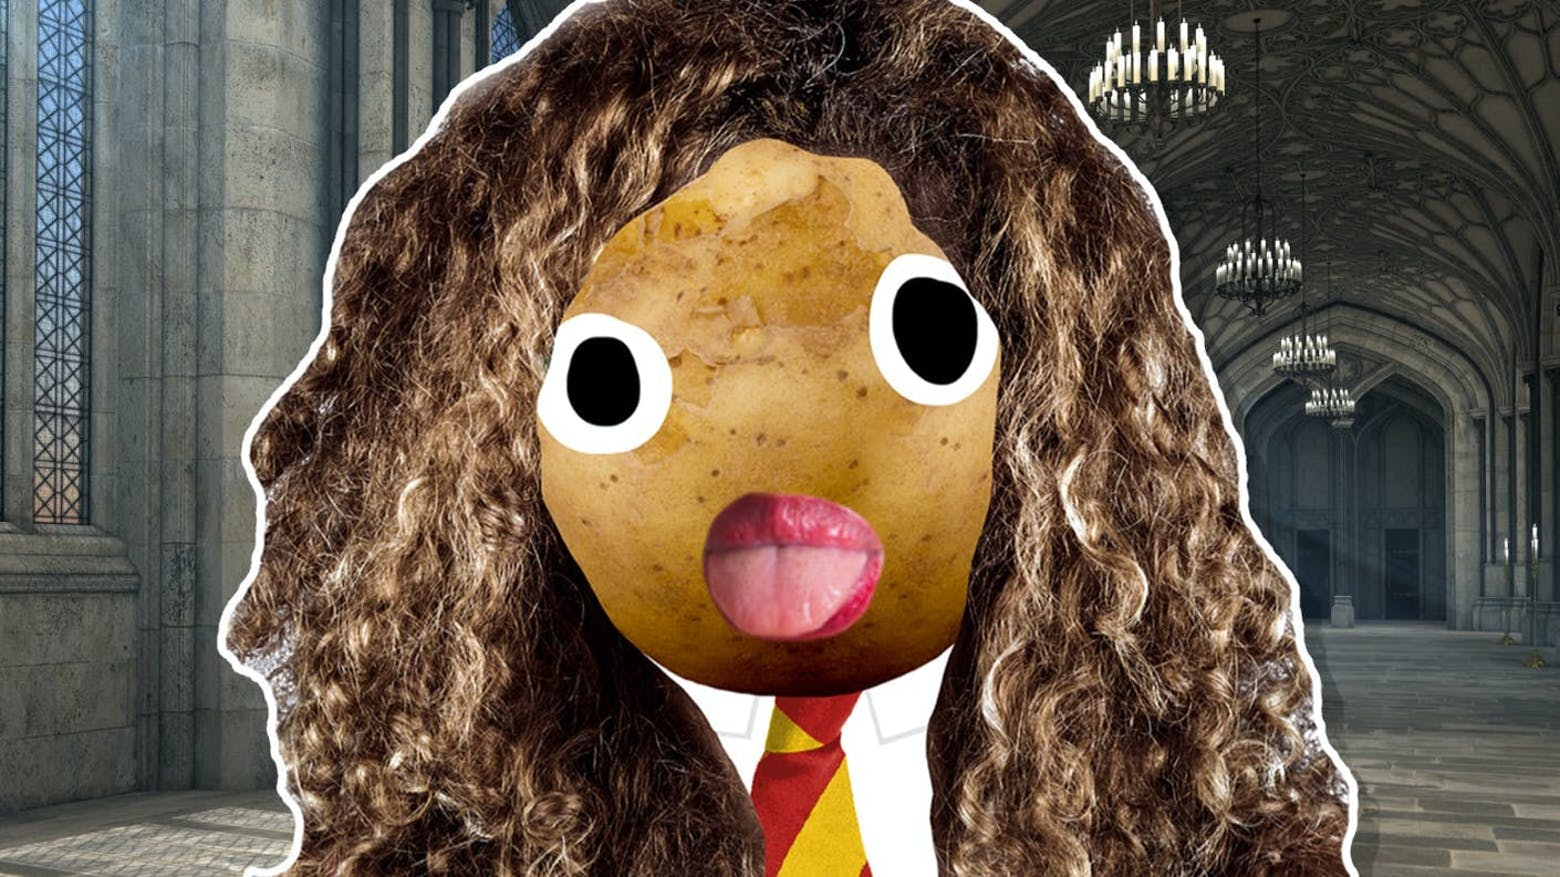 A potato-looking Hermione Granger in a scene from Harry Potter